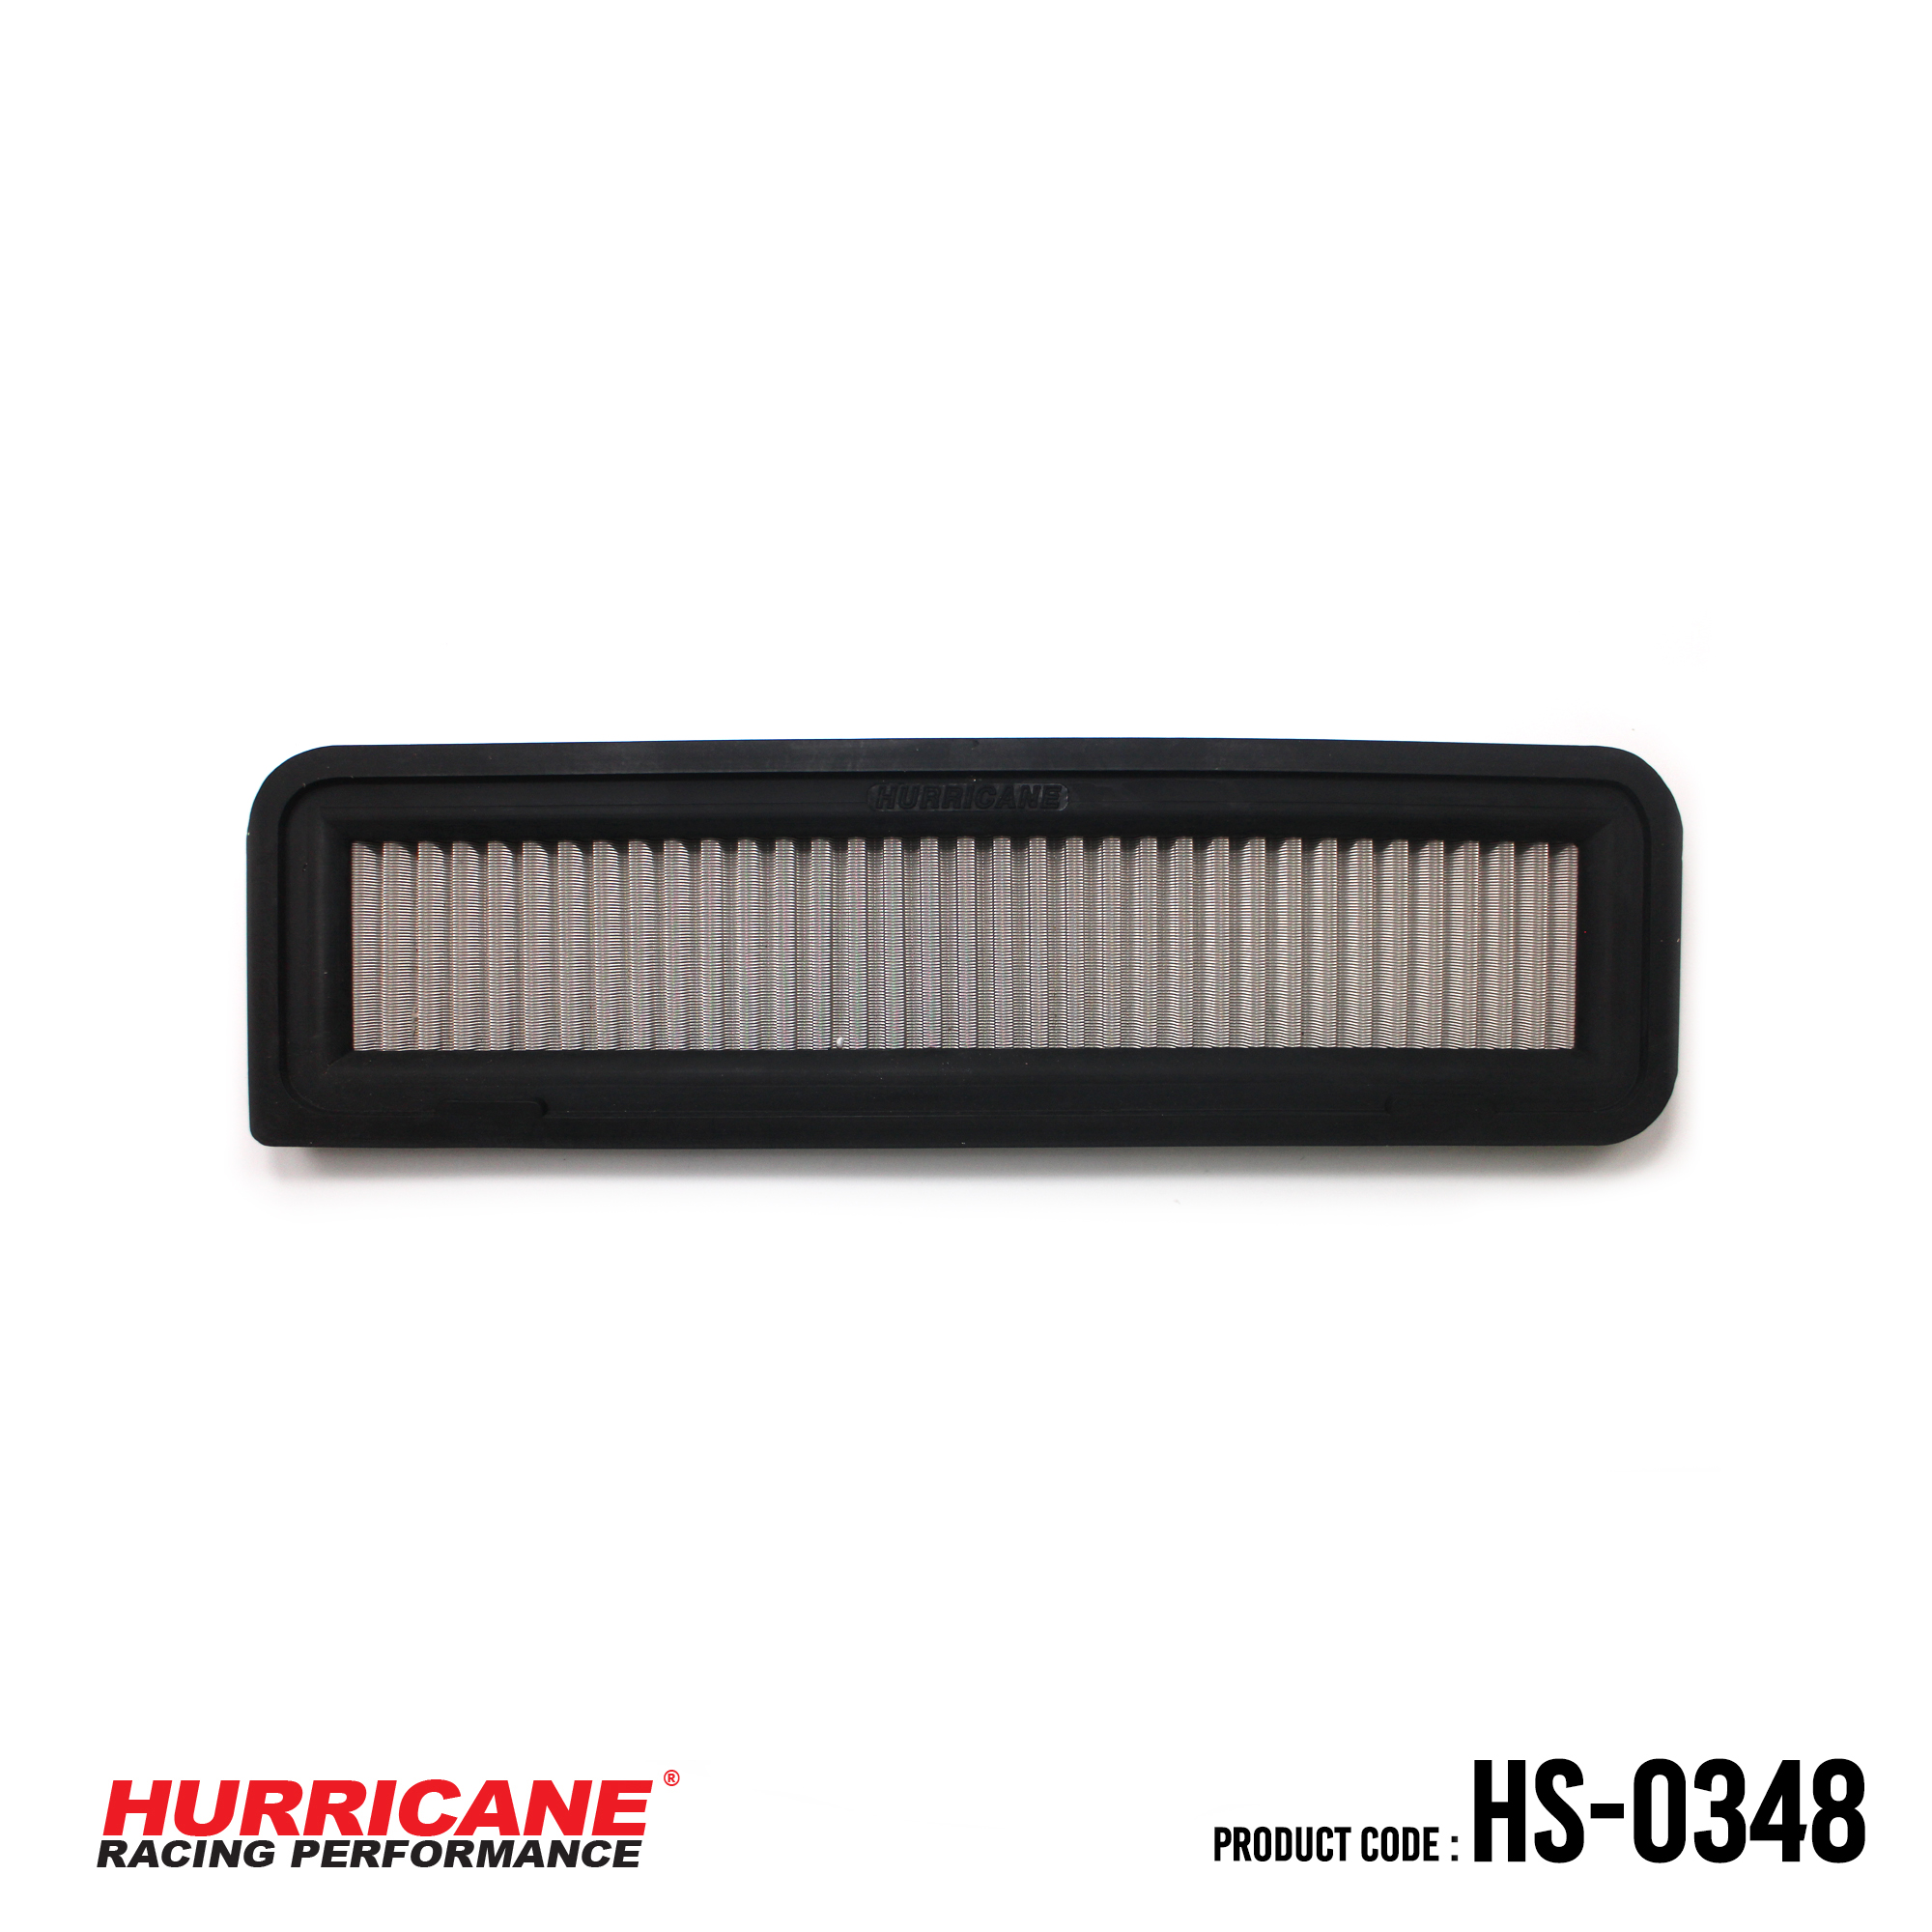 HURRICANE STAINLESS STEEL AIR FILTER FOR HS-0348 Toyota